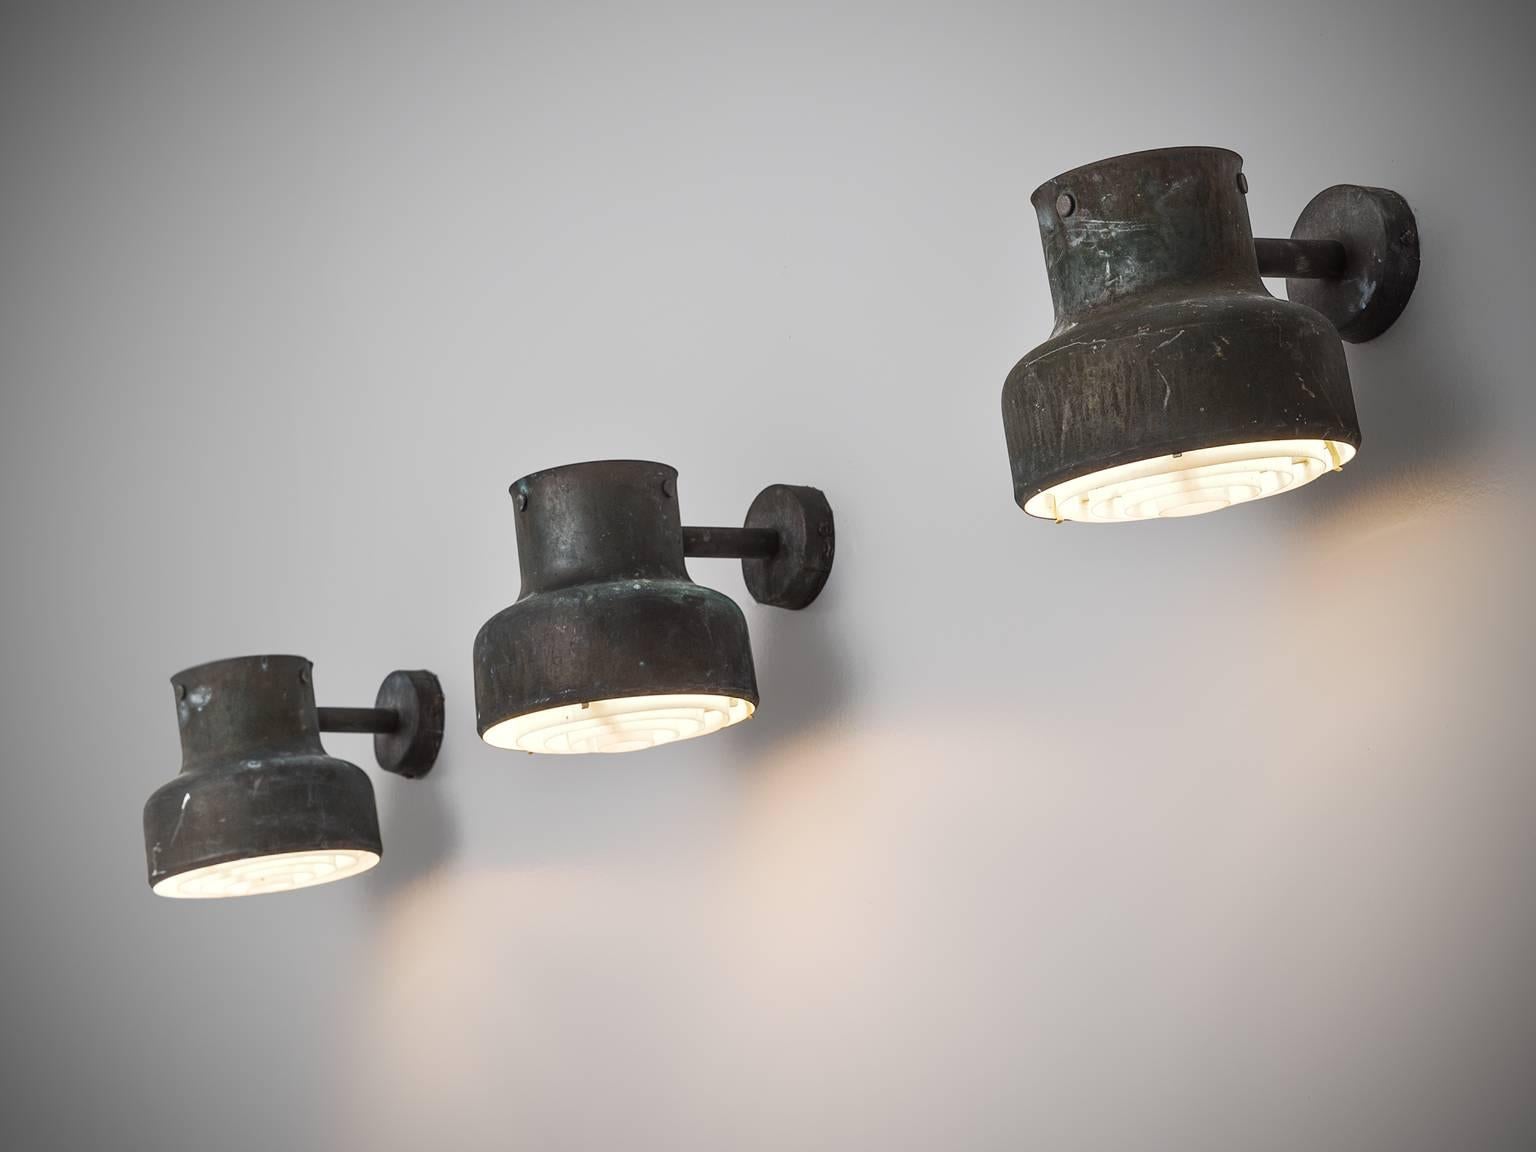 Set of three 'Bumling' wall lights, in metal and plastic, by Anders Pehrson for Atelje´ Lyktan, Sweden, 1968.

Set of three patinated copper colored 'Bumling' wall light by Anders Pehrson for Atelje´ Lyktan. Well designed Industrial wall lights